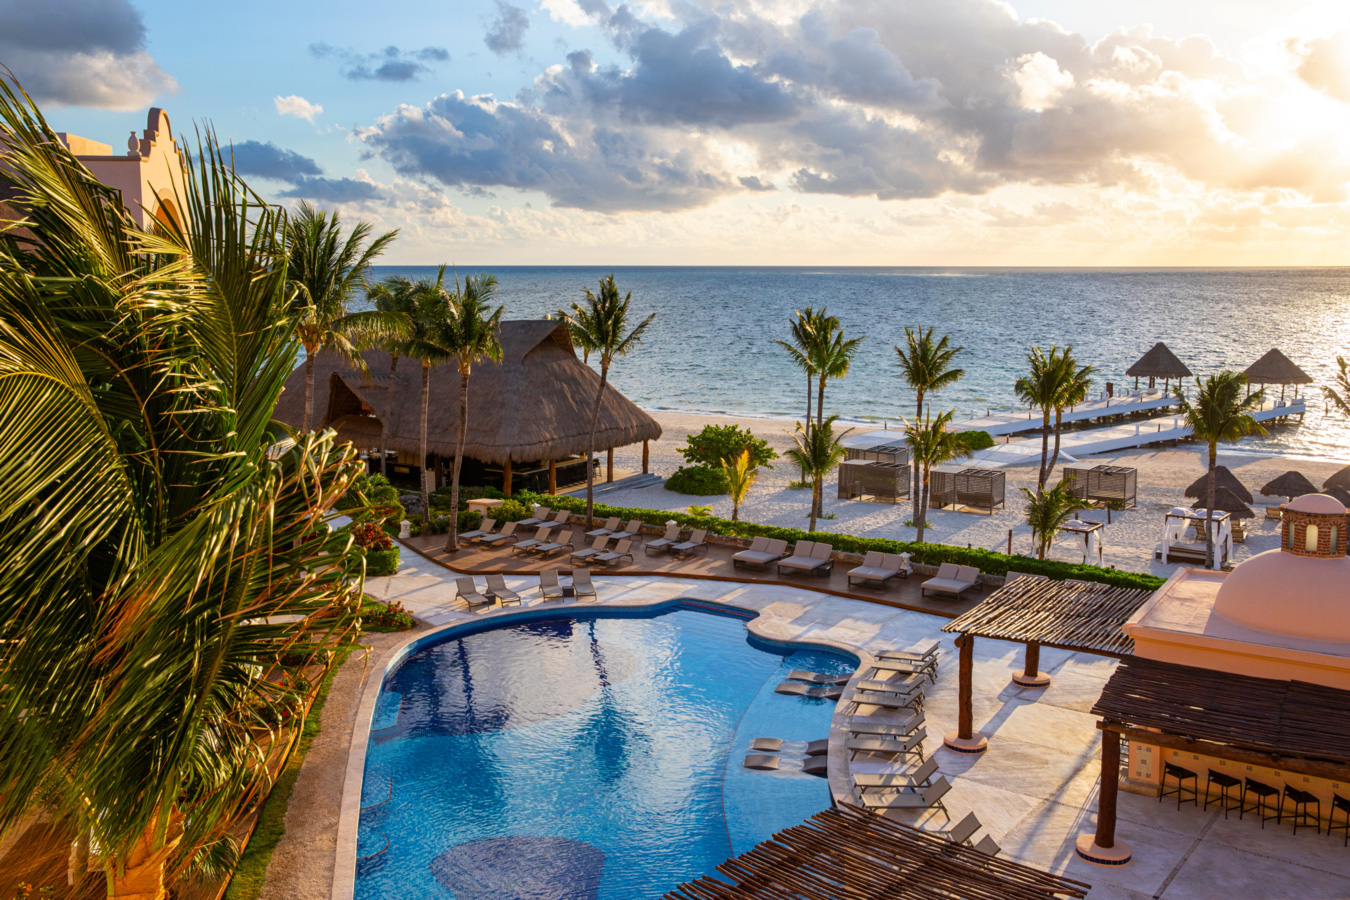 Excellence Riviera Cancun: One of the top resorts in Eastern Mexico